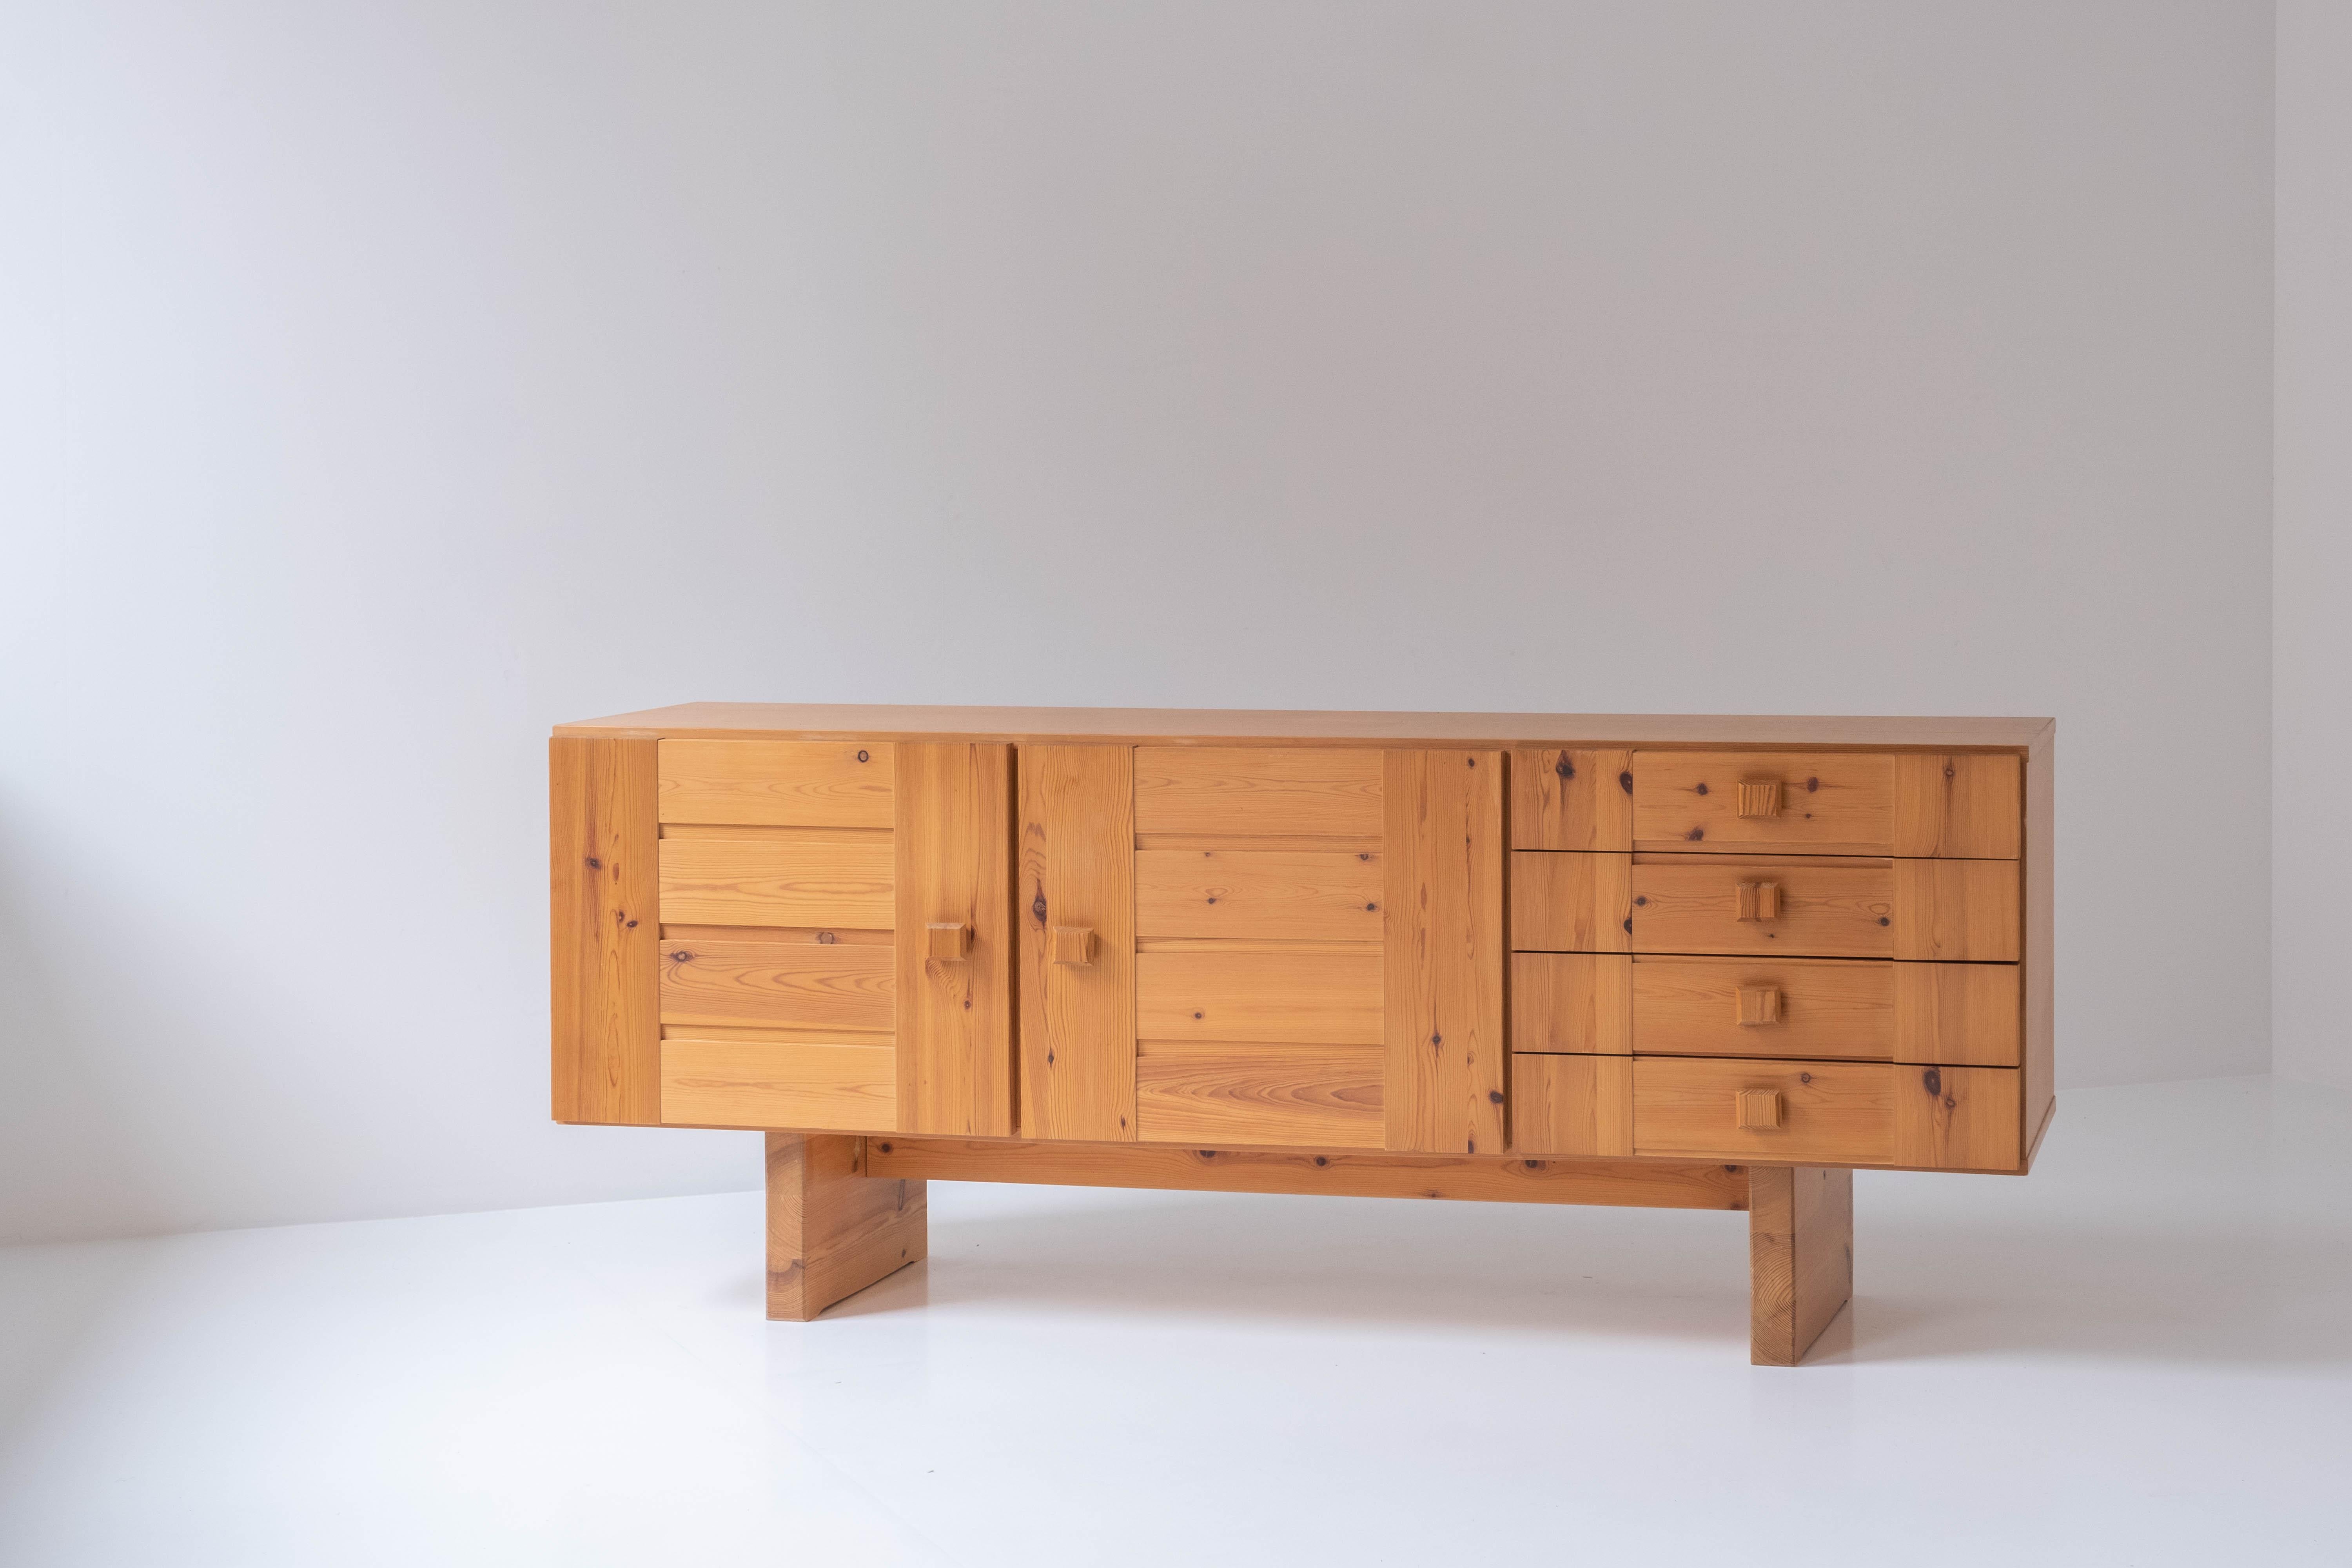 Nice rustic sideboard in pine from Denmark, 1960s. This low sideboard features an open storage area on de left and four drawers on the right. Overall in a very good and original condition with only minor wear (some visible dammage at the drawers on